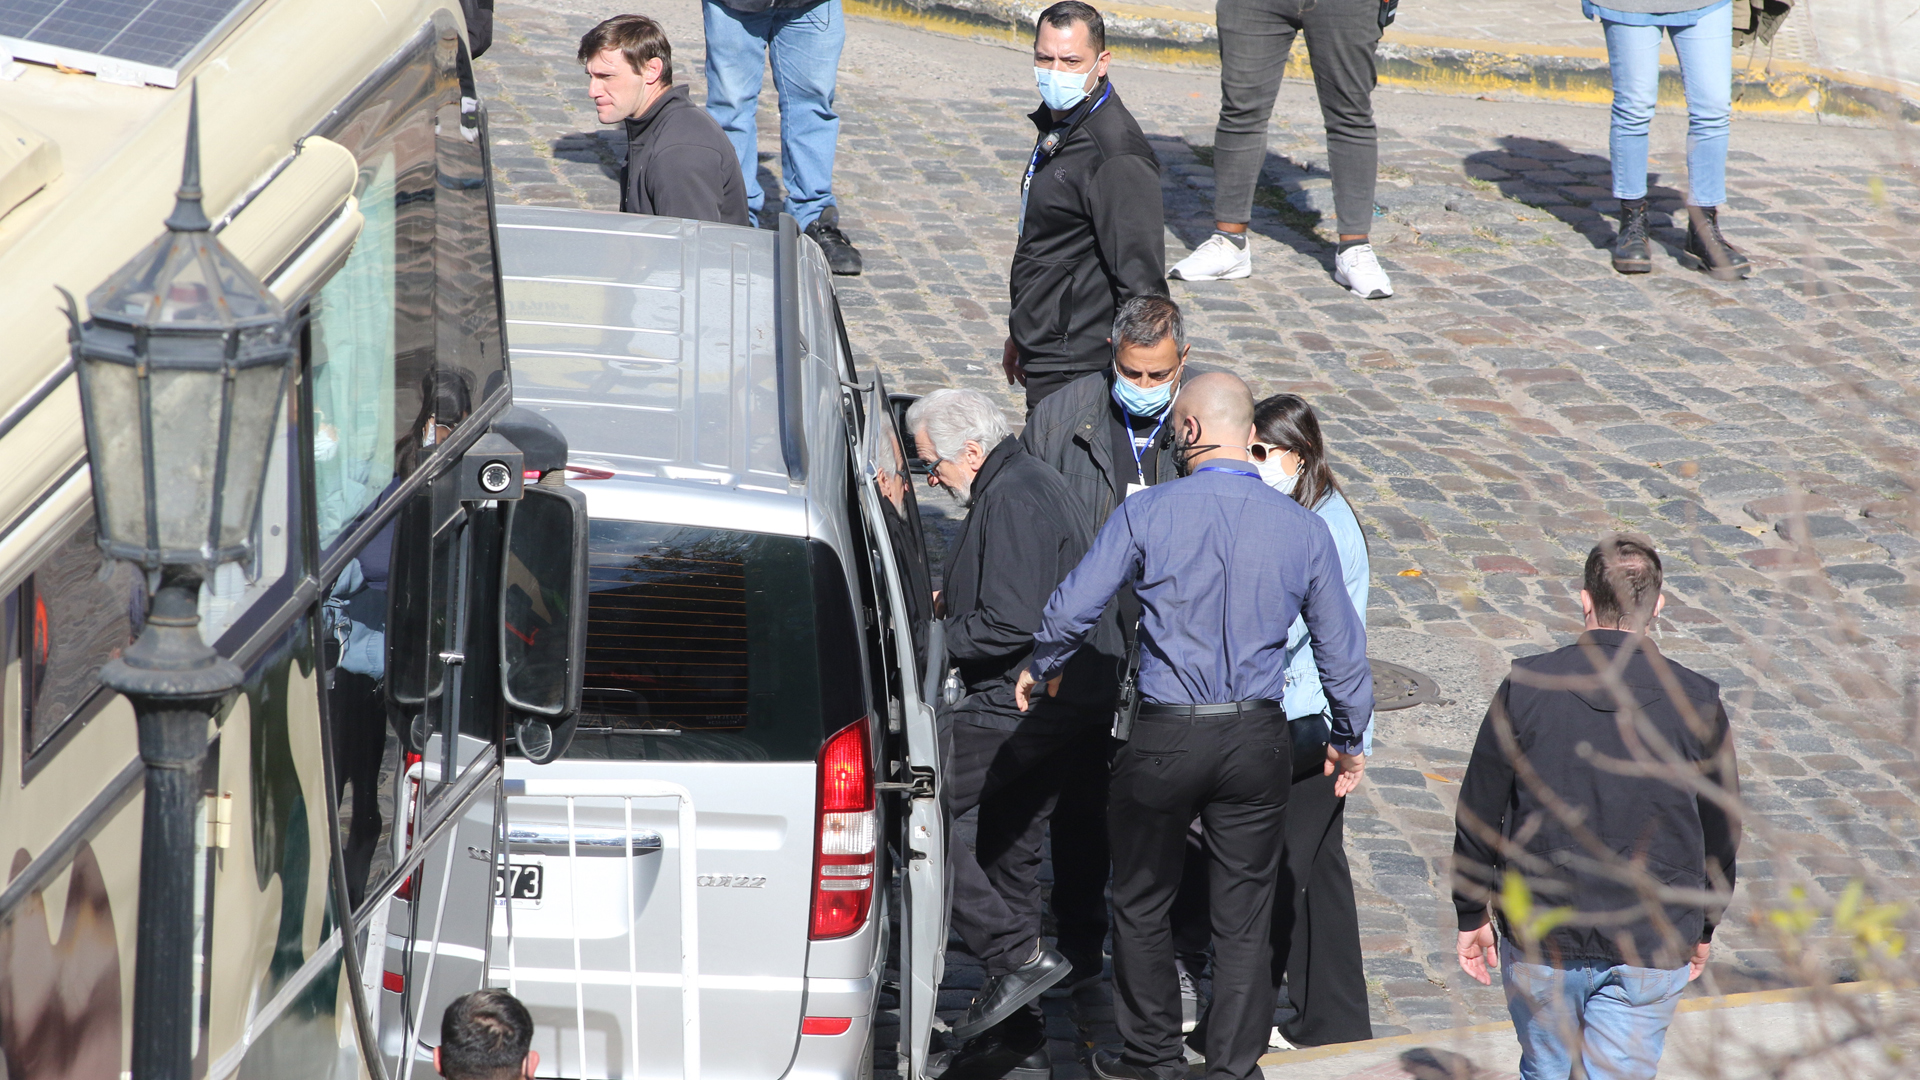 On board a truck, the famous actor did some sightseeing in our country after the shooting